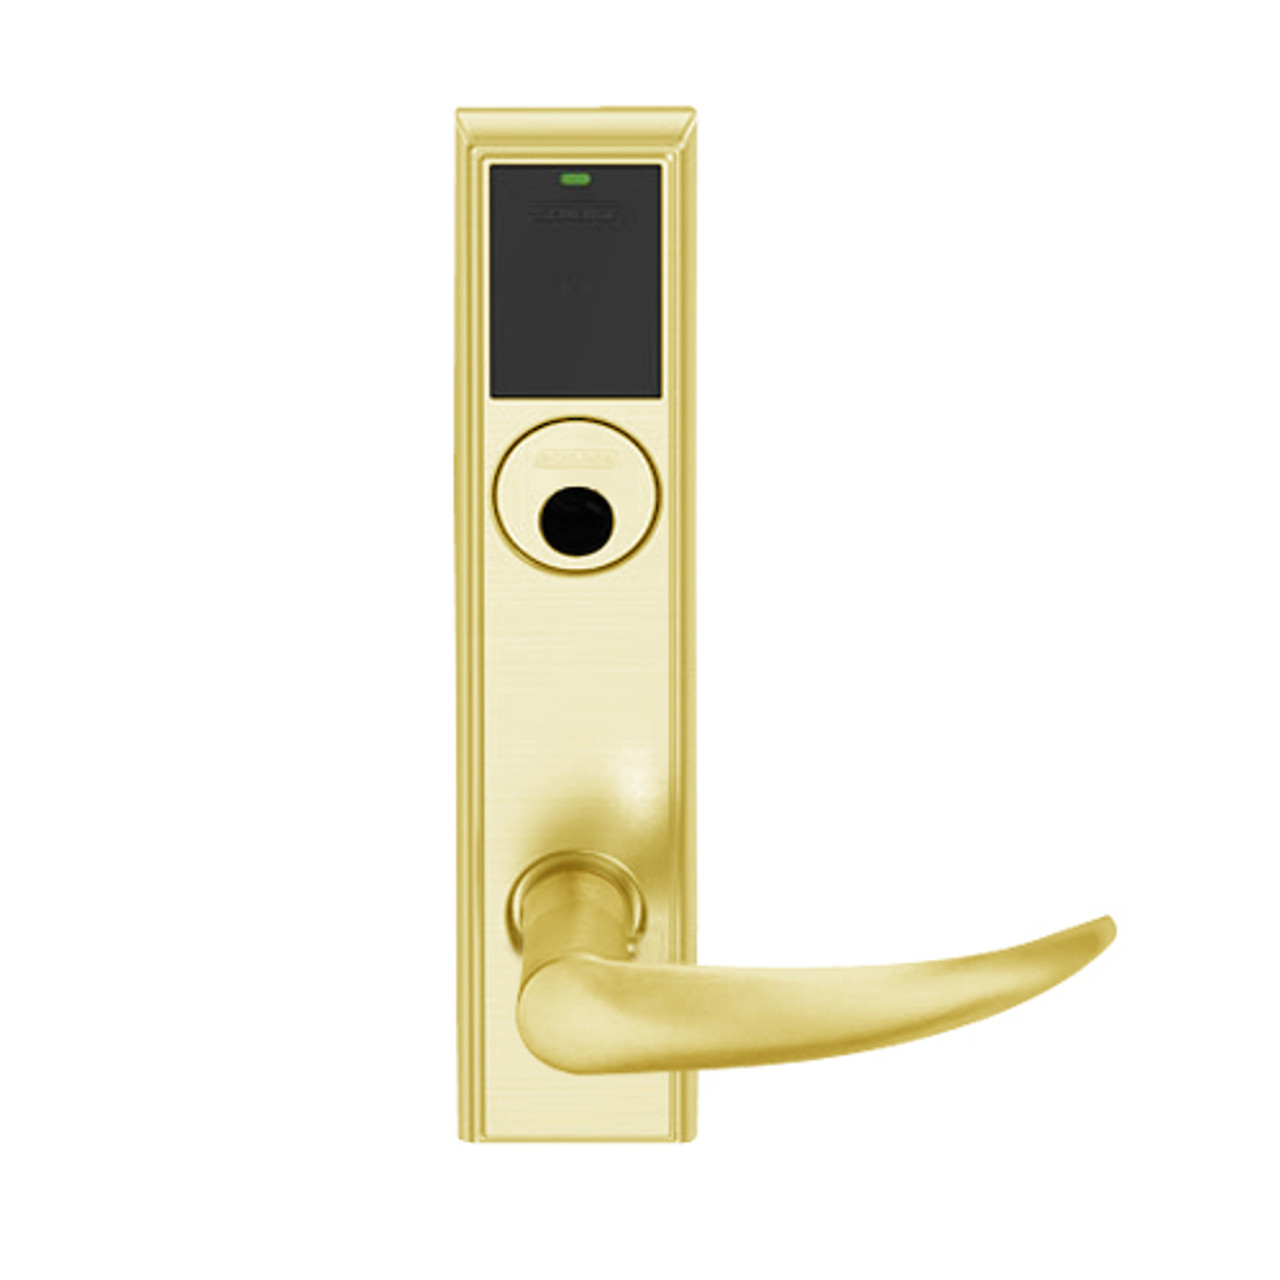 LEMD-ADD-L-OME-605 Schlage Less Mortise Cylinder Privacy/Apartment Wireless Addison Mortise Deadbolt Lock with LED and Omega Lever in Bright Brass